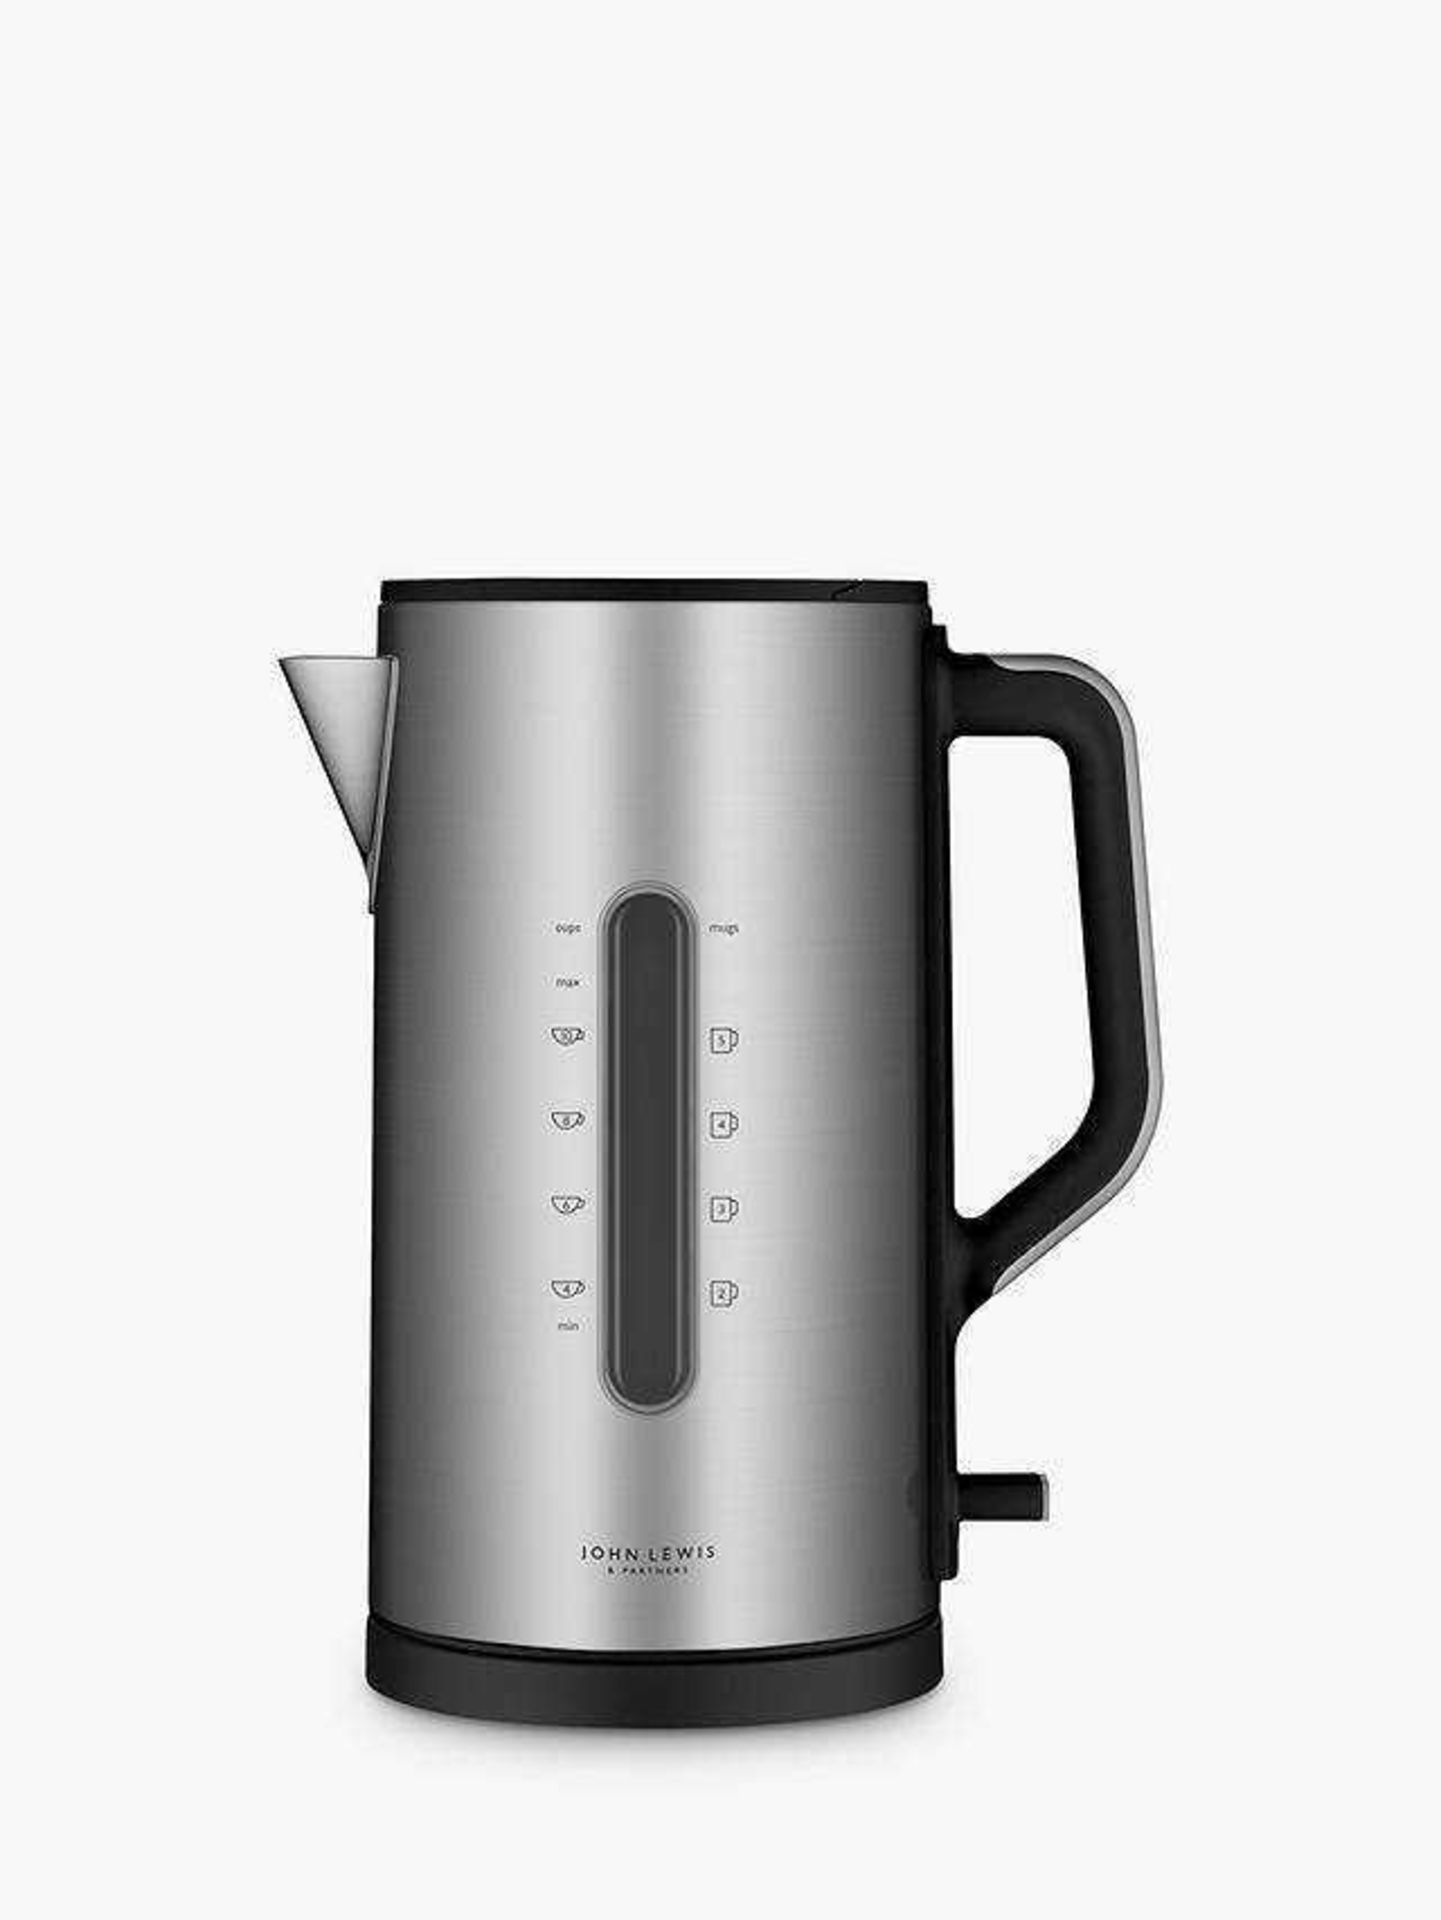 RRP £45 Each Boxed Assorted John Lewis Kitchen Items To Include 1.7 Litre Kettle And 2-Slice Toaste - Image 3 of 3